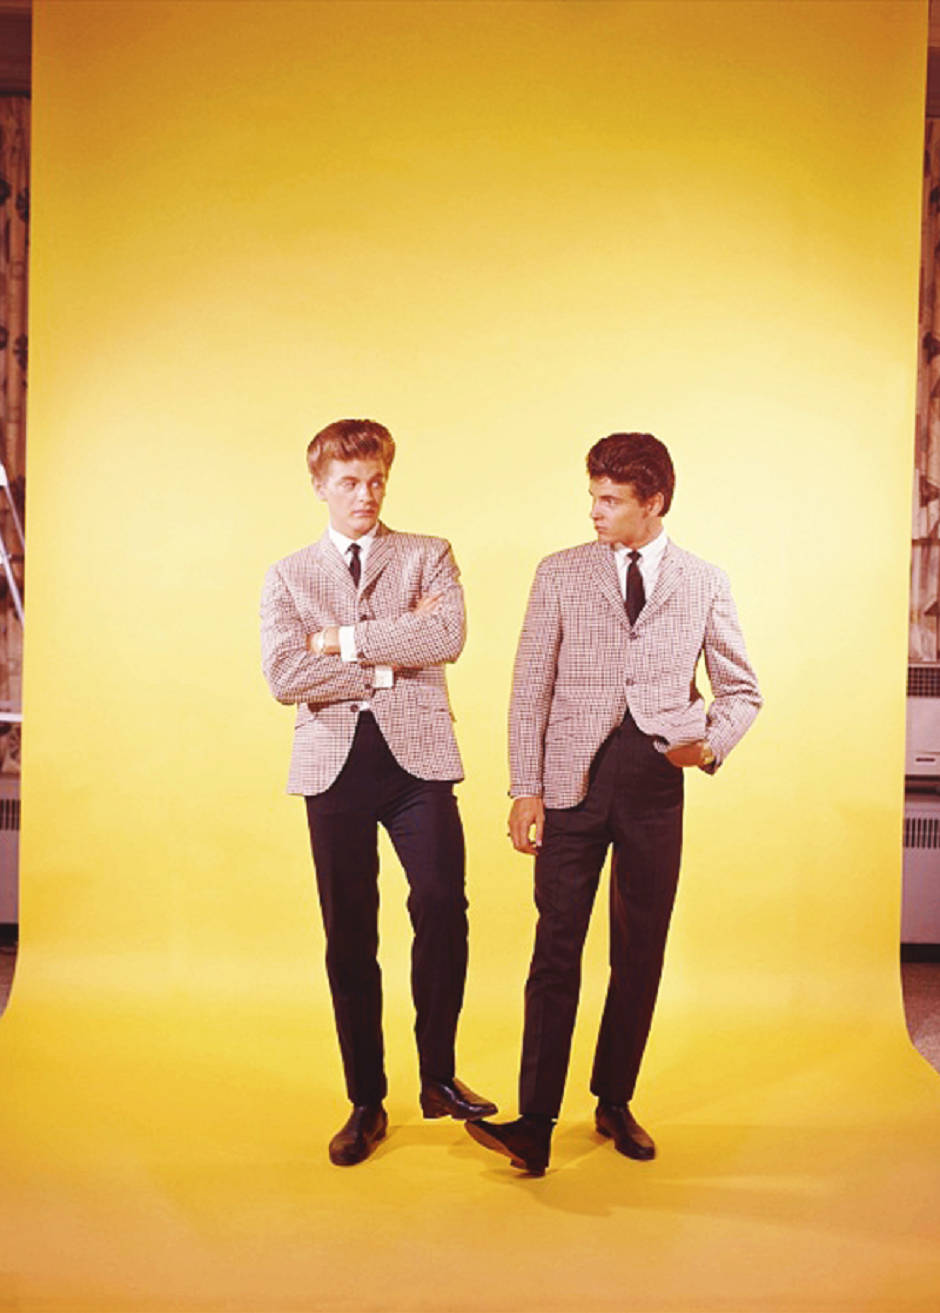 Popmusik Prominente Everly Brothers Studio Fotoshooting Wallpaper